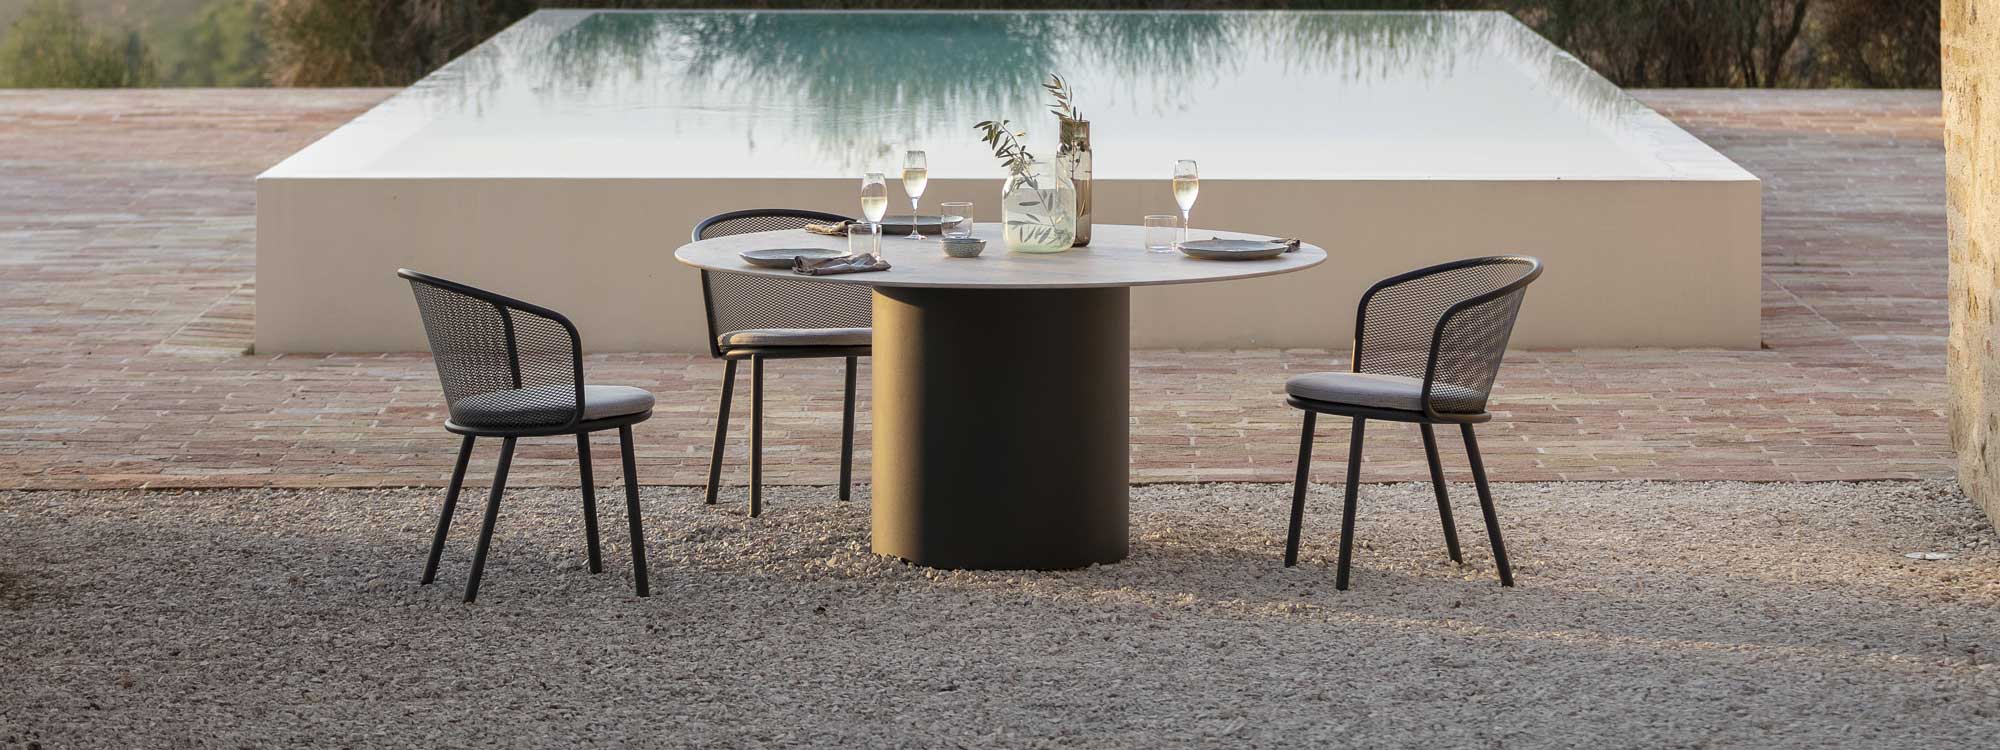 Image of Branta circular garden dining table and Baza garden dining chairs on terrace in early evening light